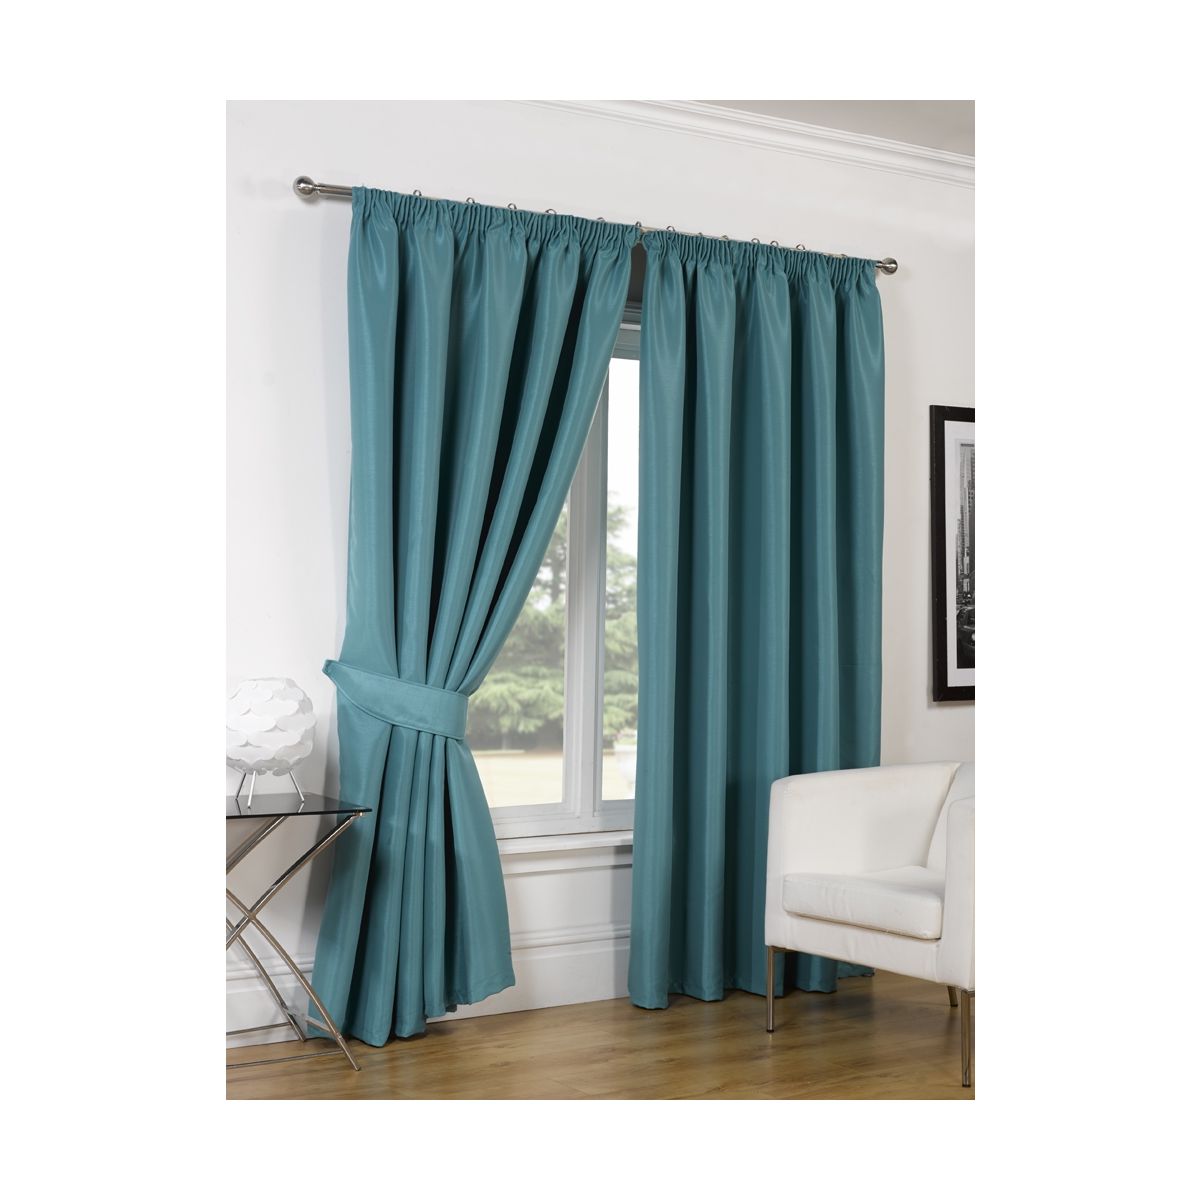 Luxury Faux Silk Blackout Curtains Including Tiebacks - Teal 46"X72"